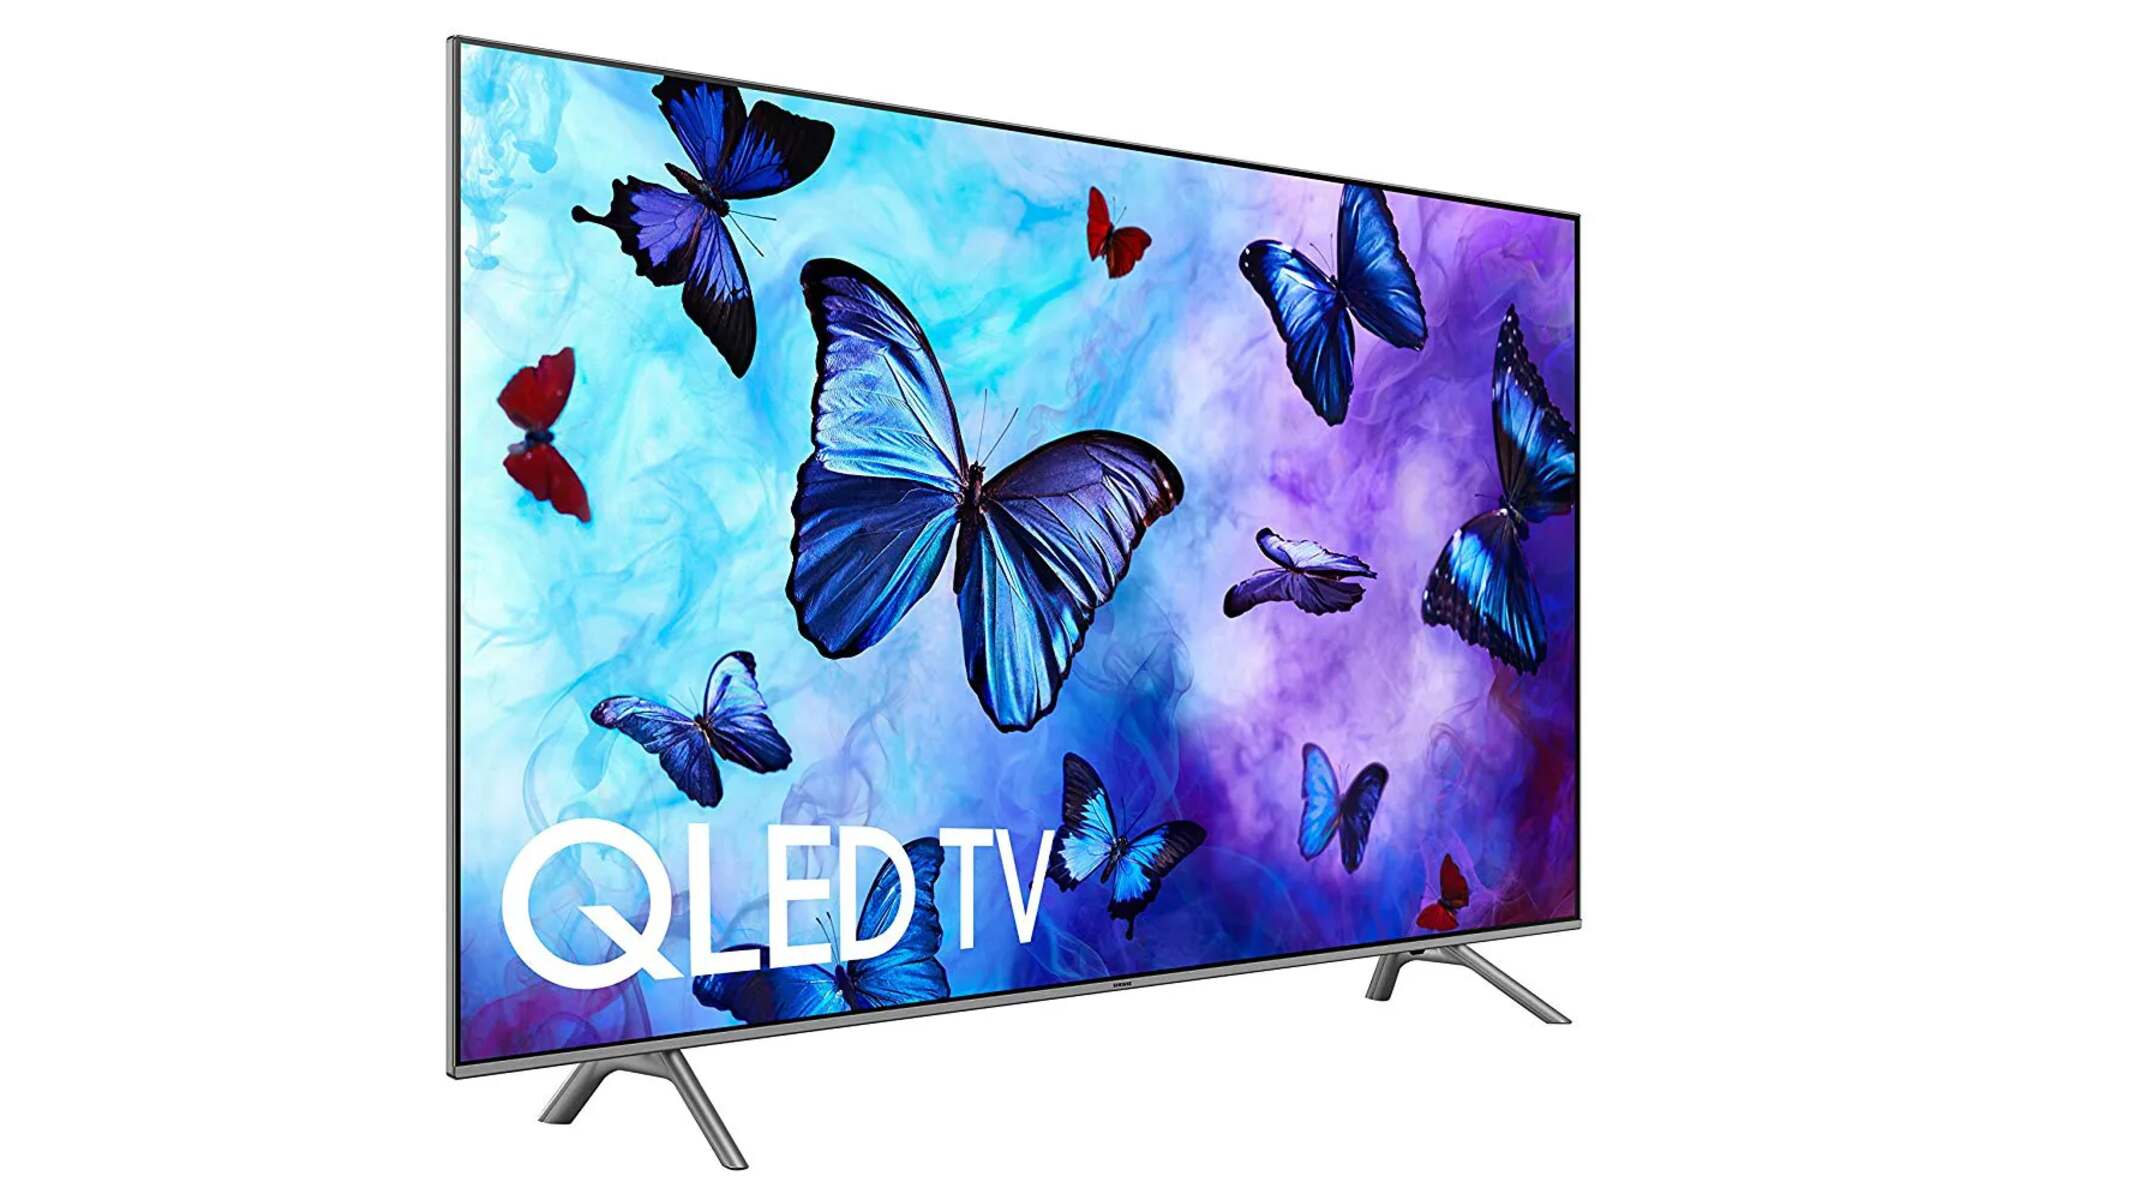 How Much Does A Samsung 82-Inch QLED TV Cost?